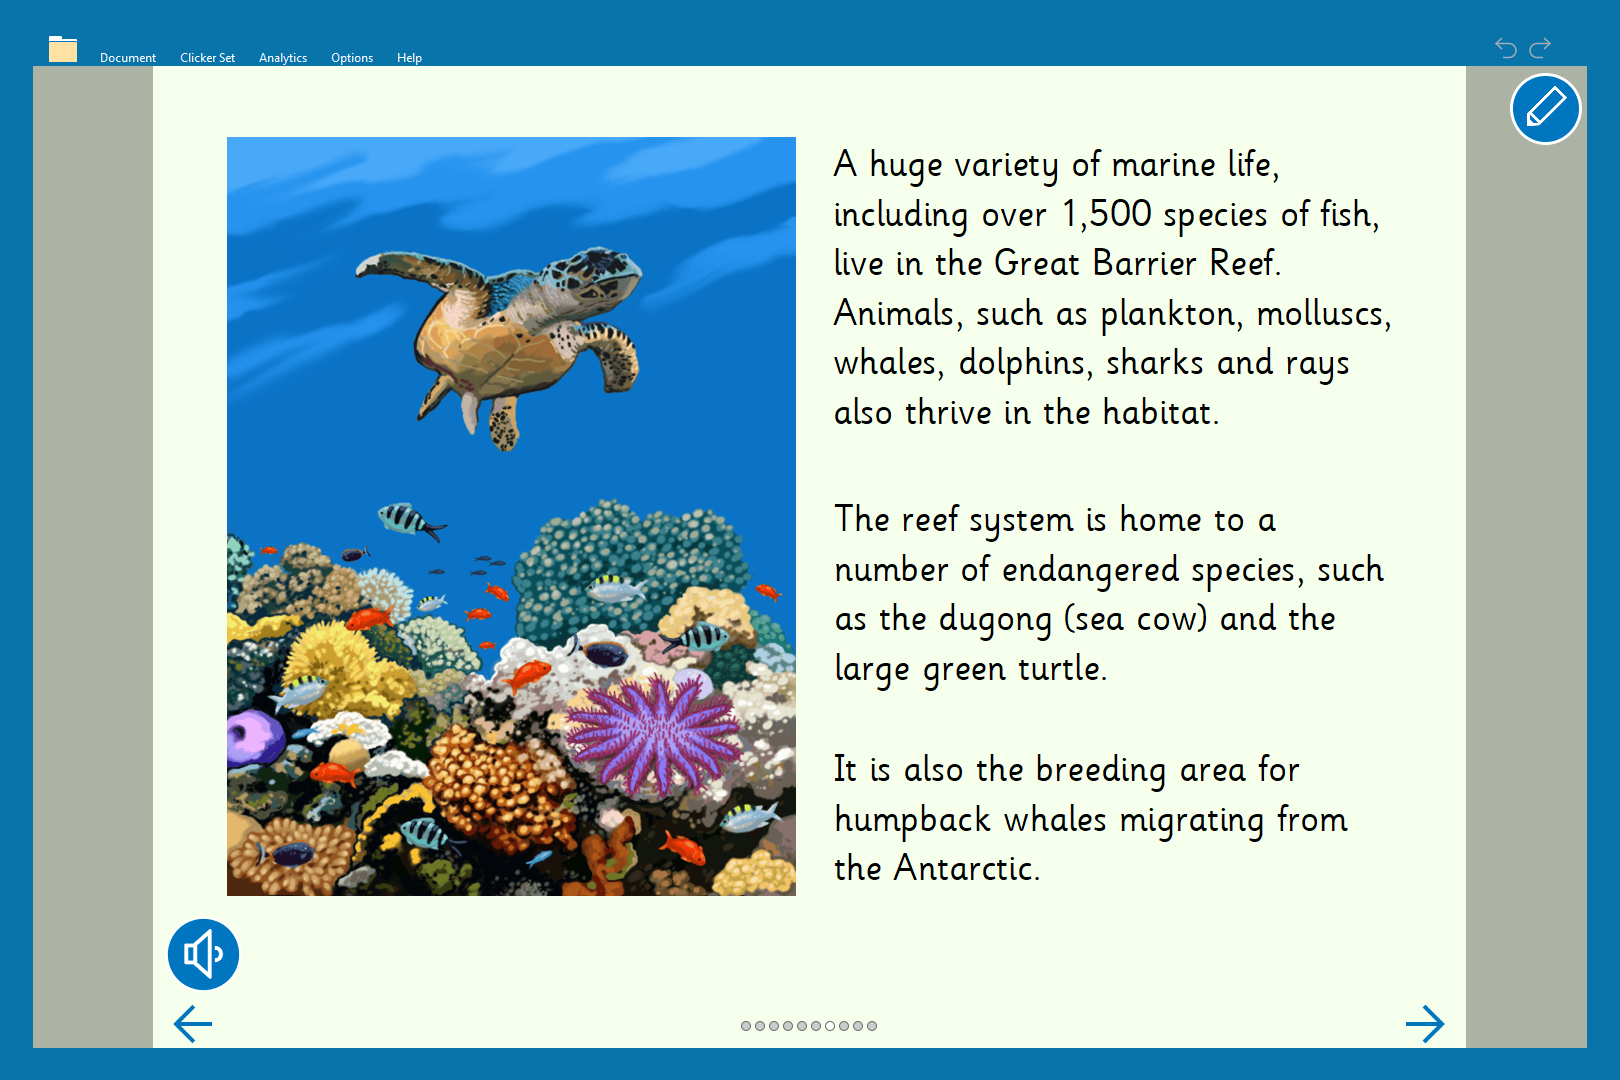 Discover the Great Barrier Reef through Clicker-1